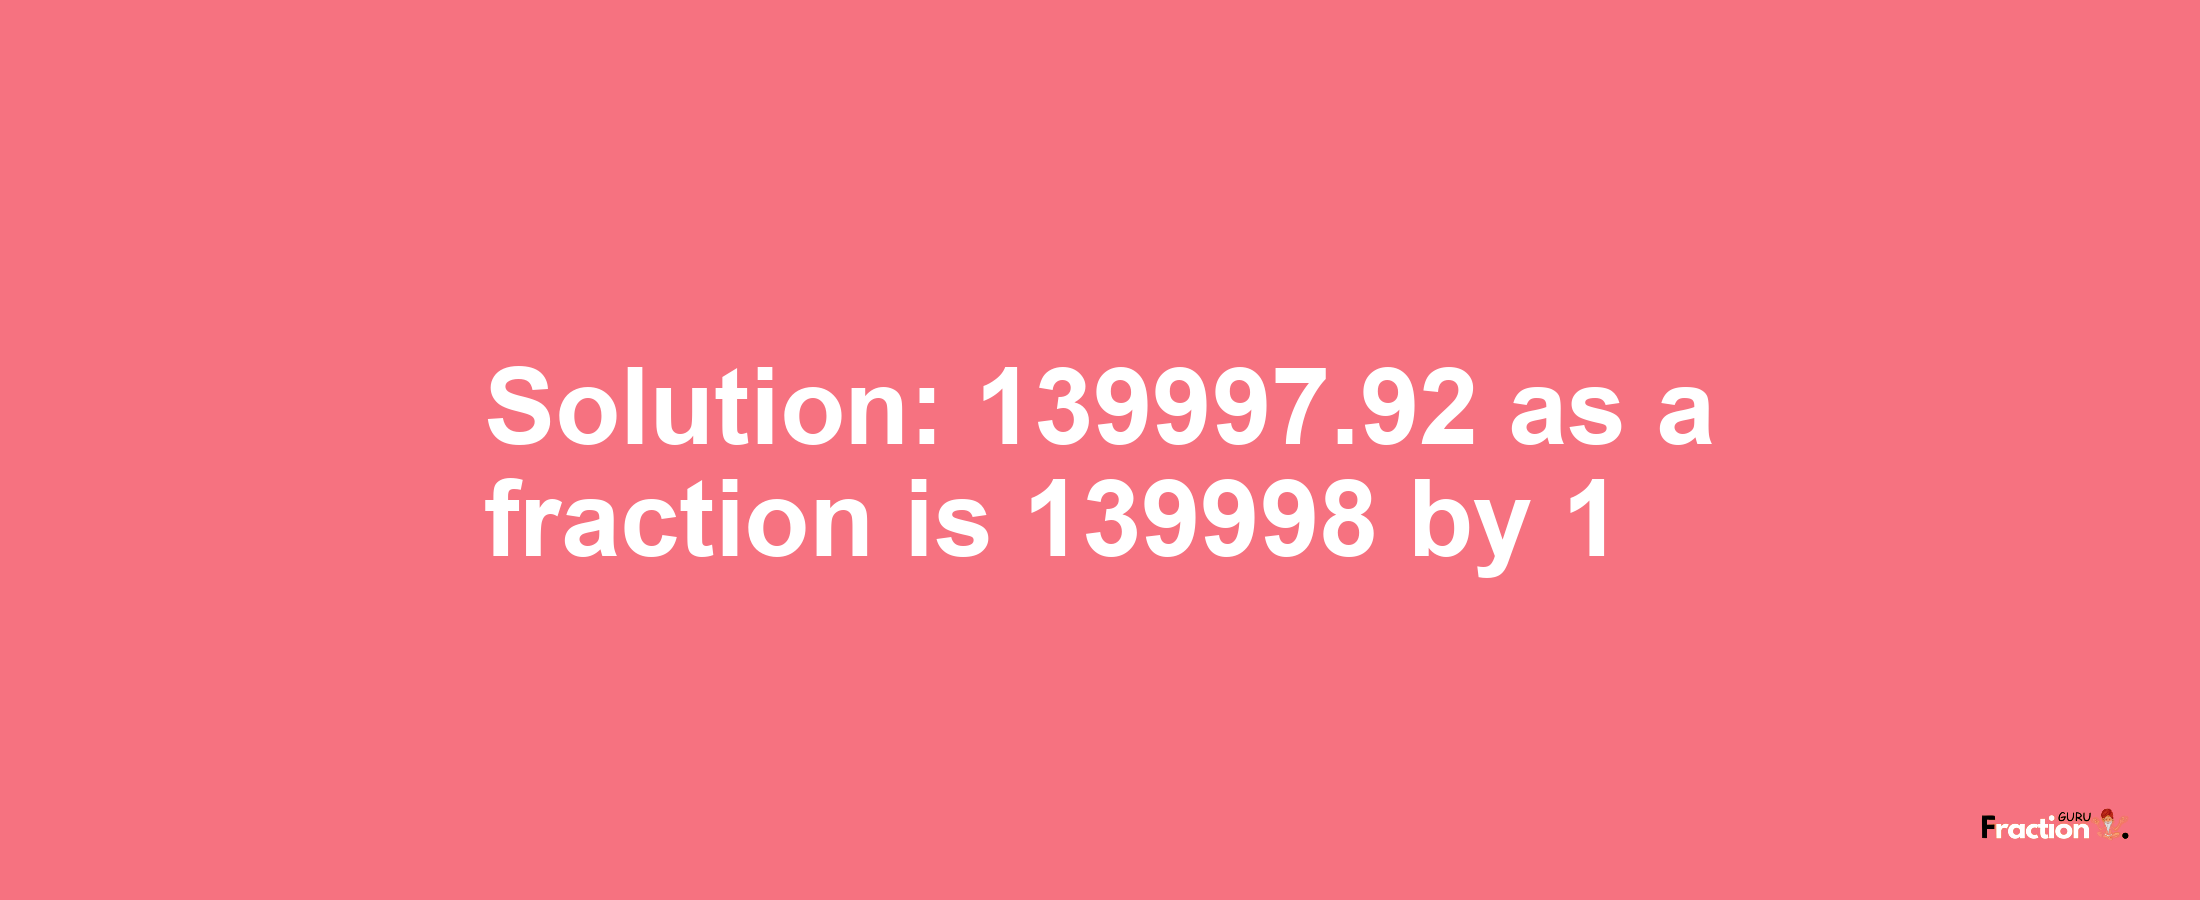 Solution:139997.92 as a fraction is 139998/1